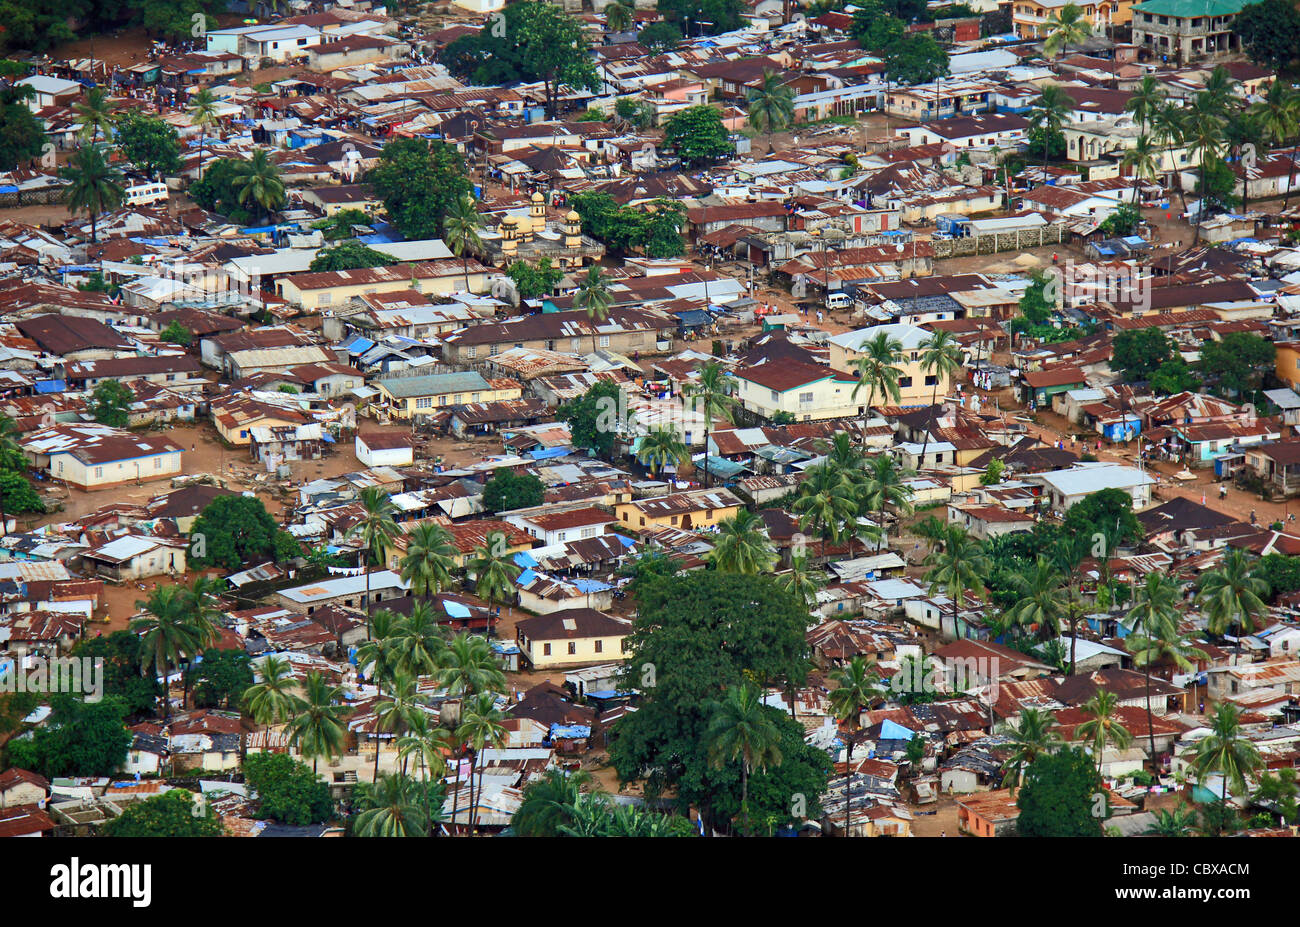 Aerial view of Freetown, Sierra Leone Stock Photo